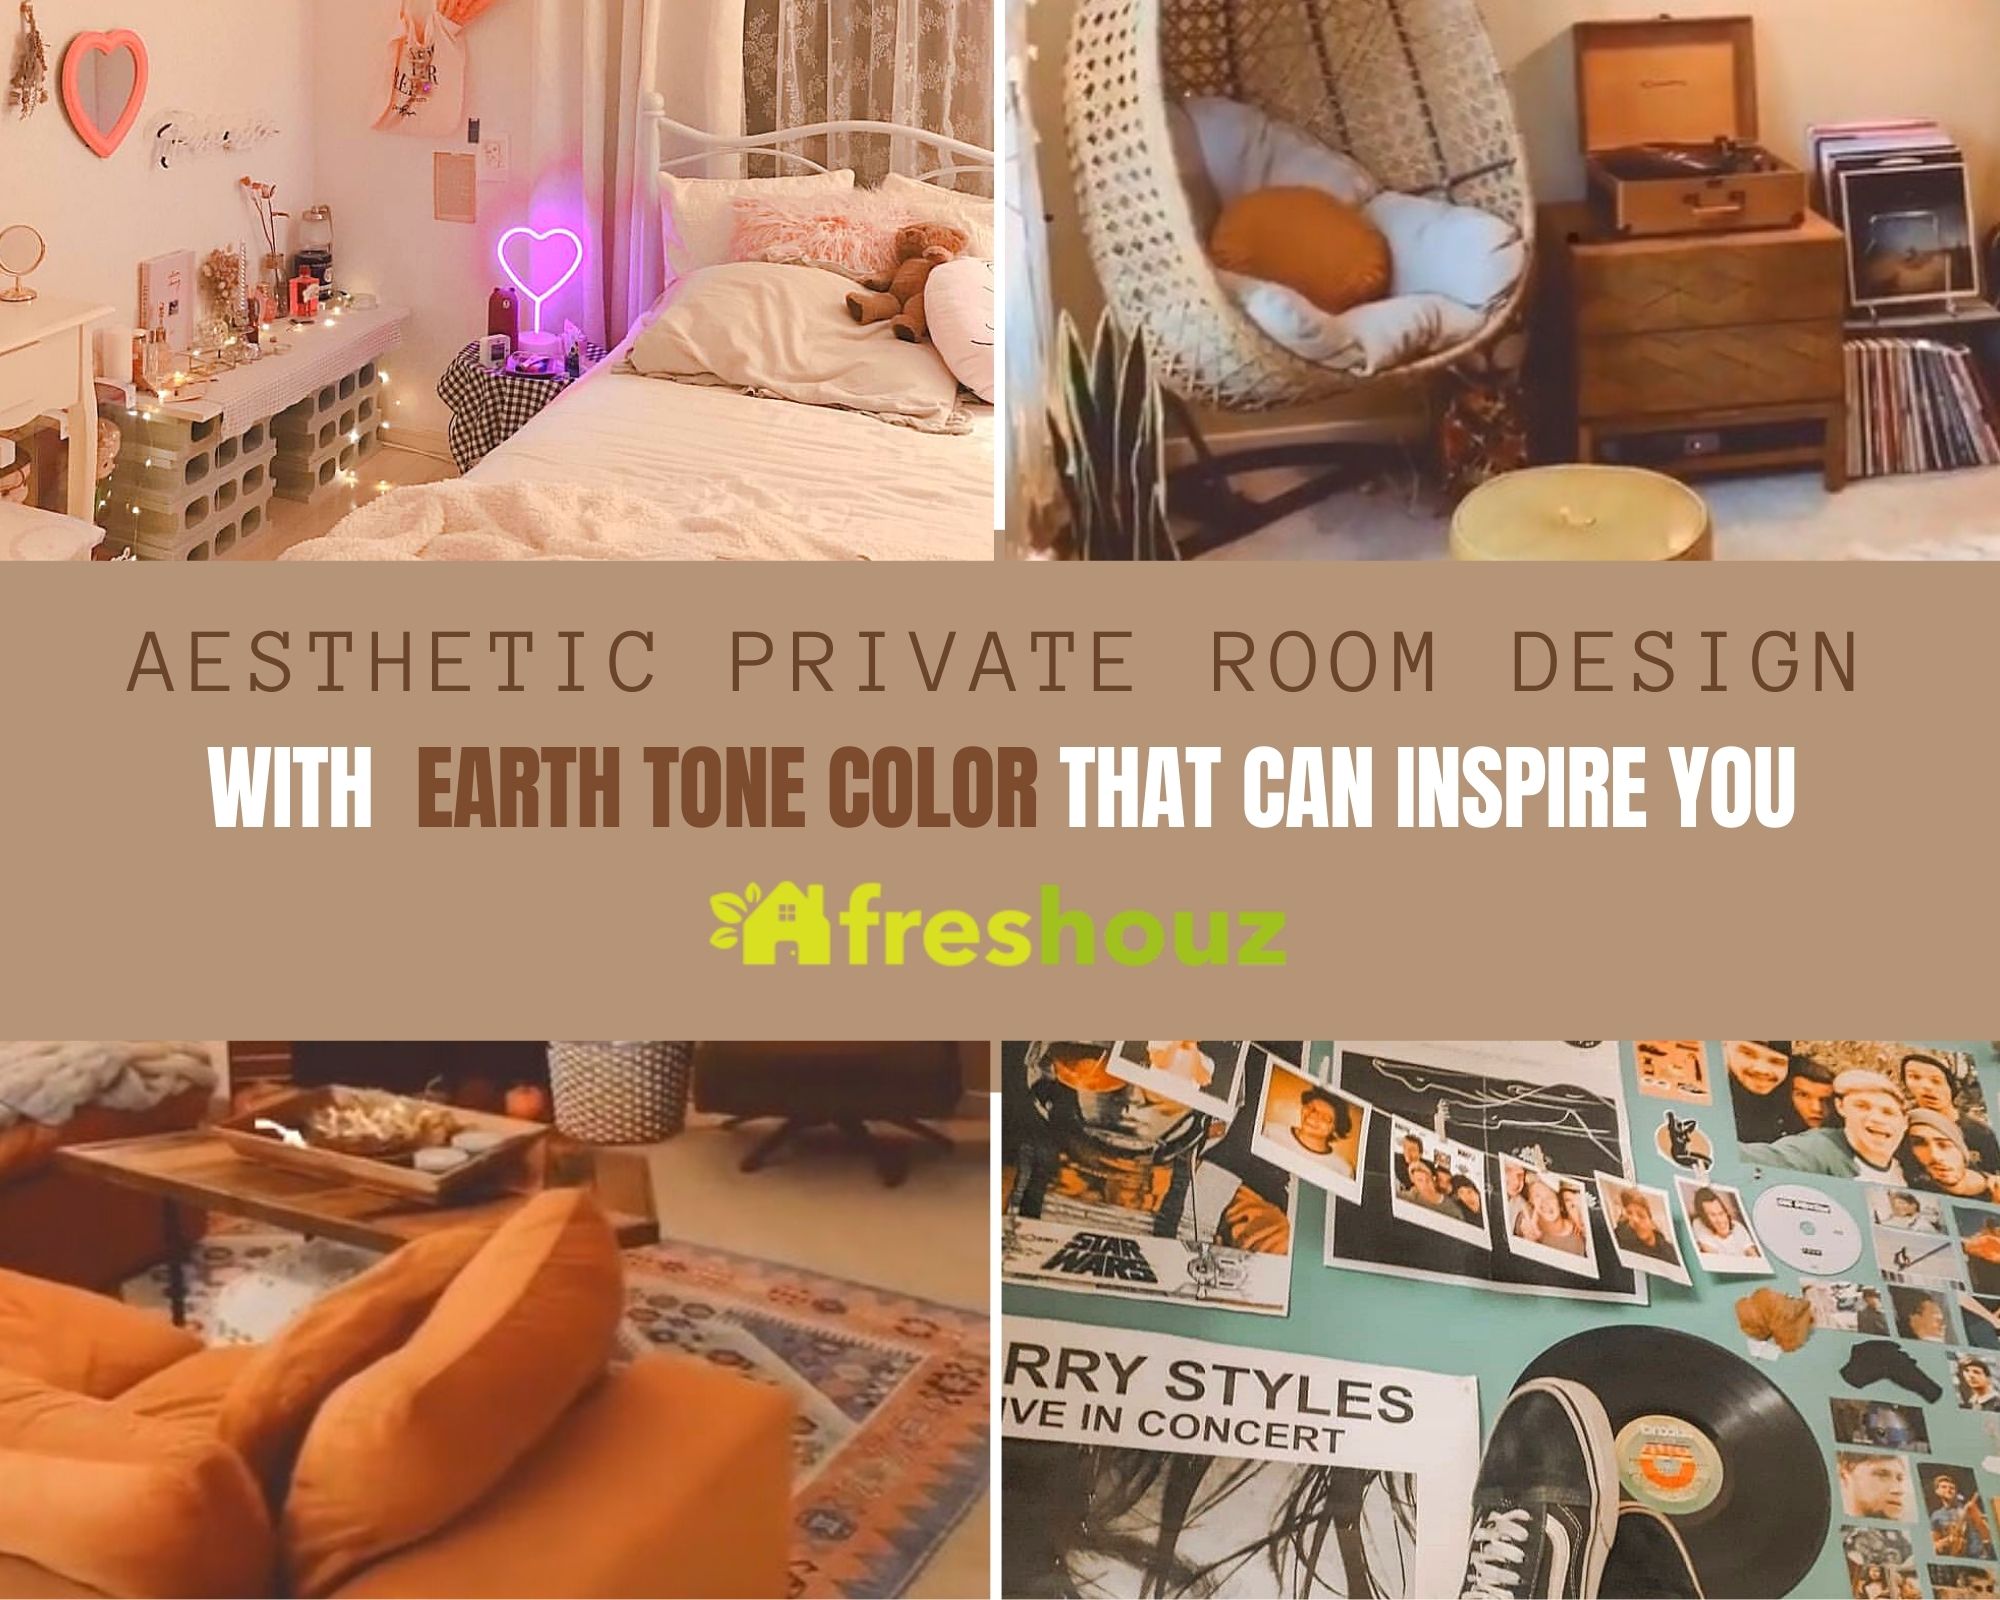 Aesthetic Private Room Design With Earth Tone Color That Can Inspire You